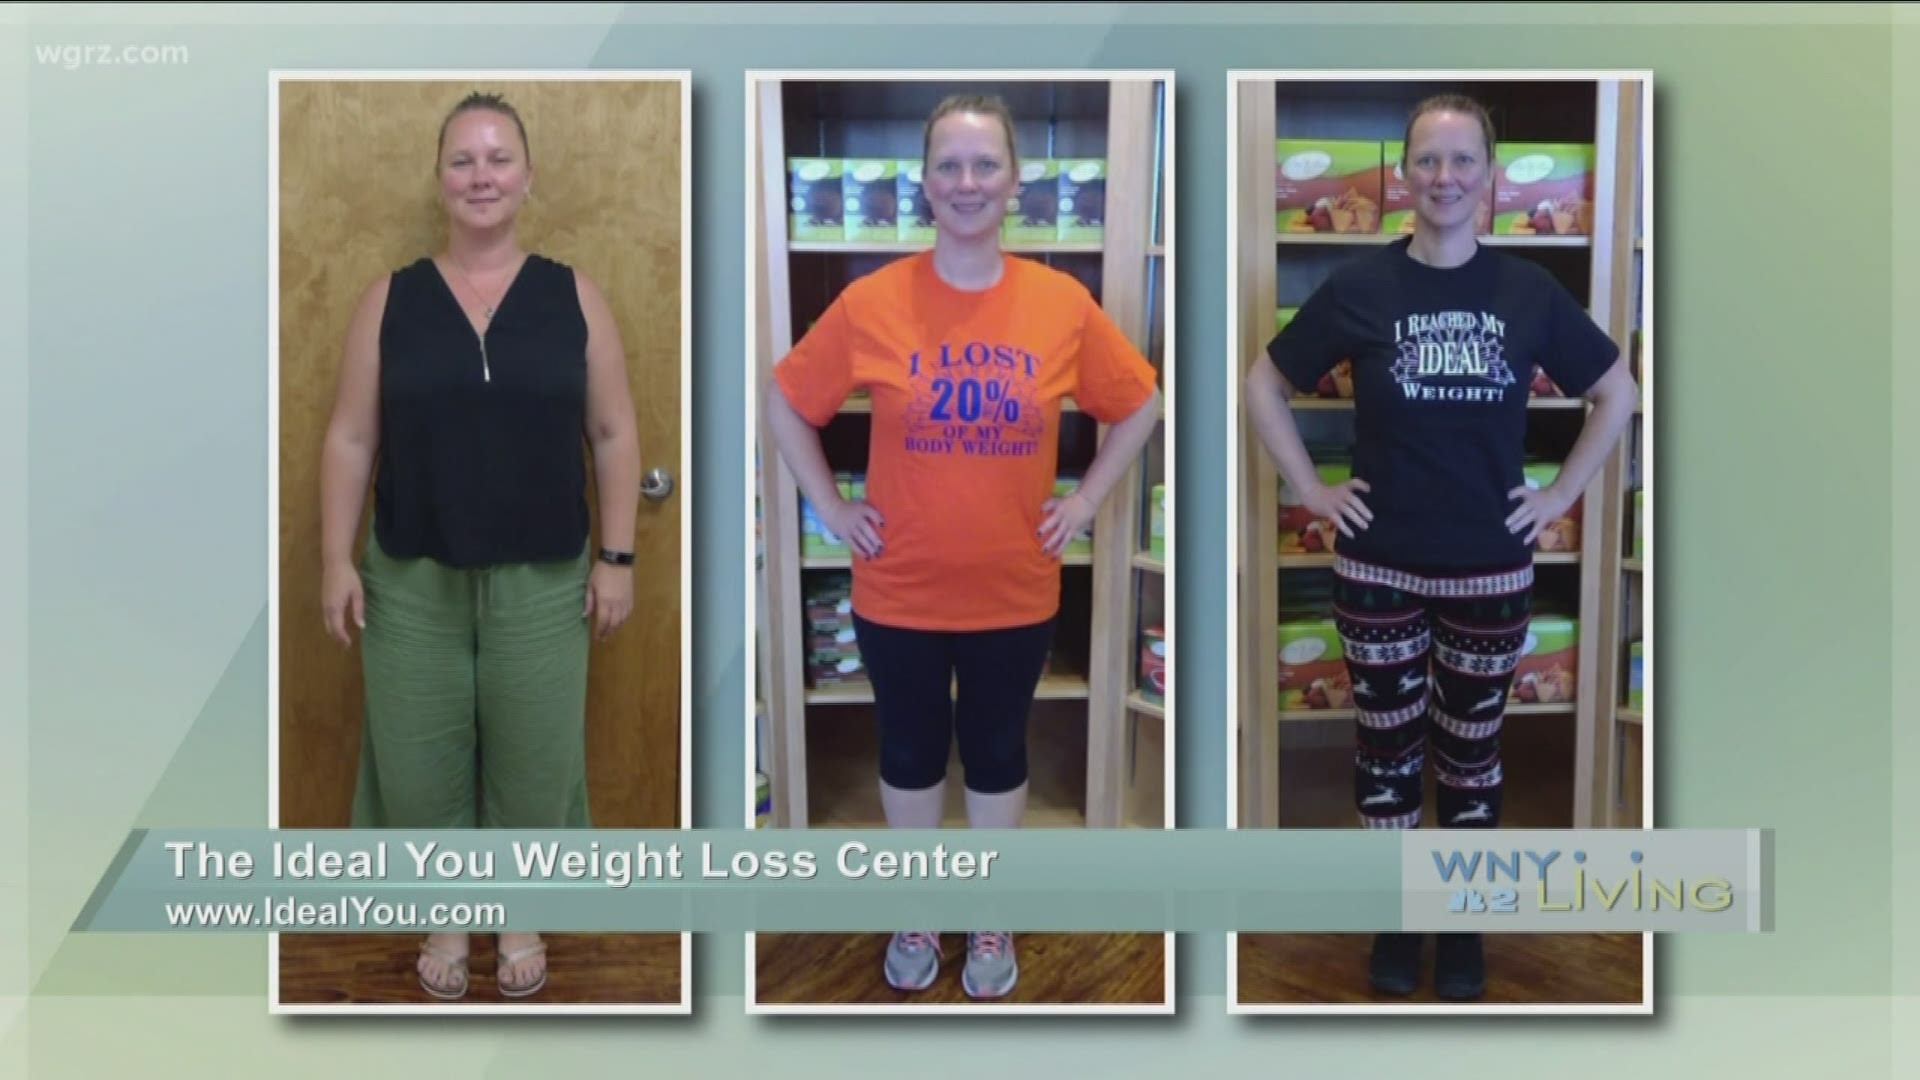 March 14 - The Ideal You Weight Loss Center (THIS VIDEO IS SPONSORED BY THE IDEA YOU WEIGHT LOSS CENTER)